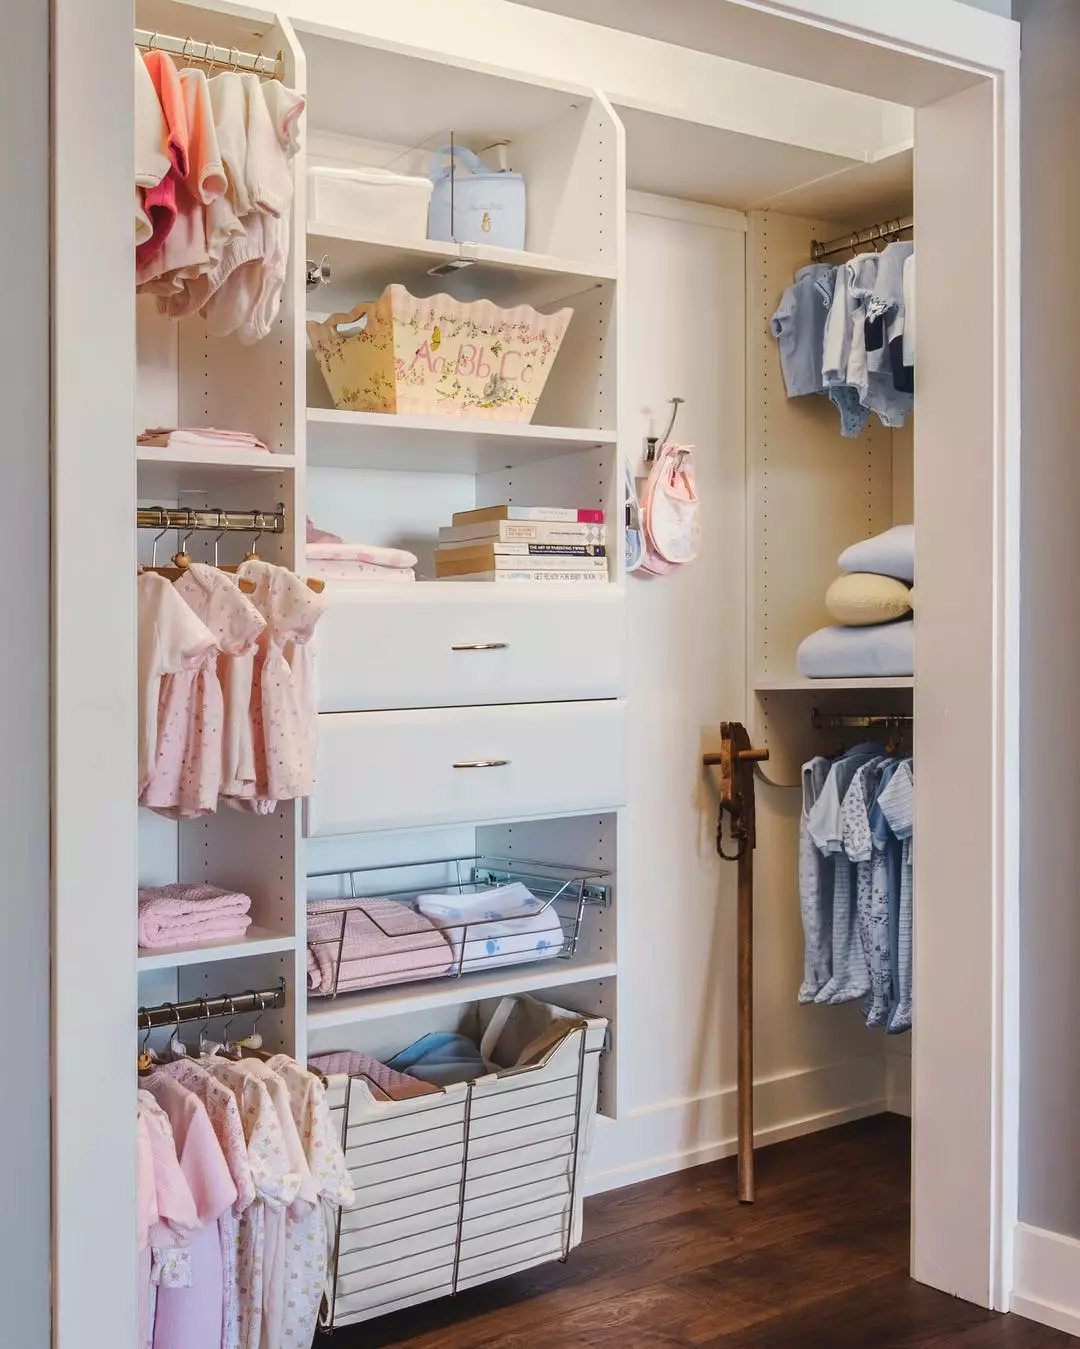 35+ Closet Organization Ideas for Making the Most of Your Space